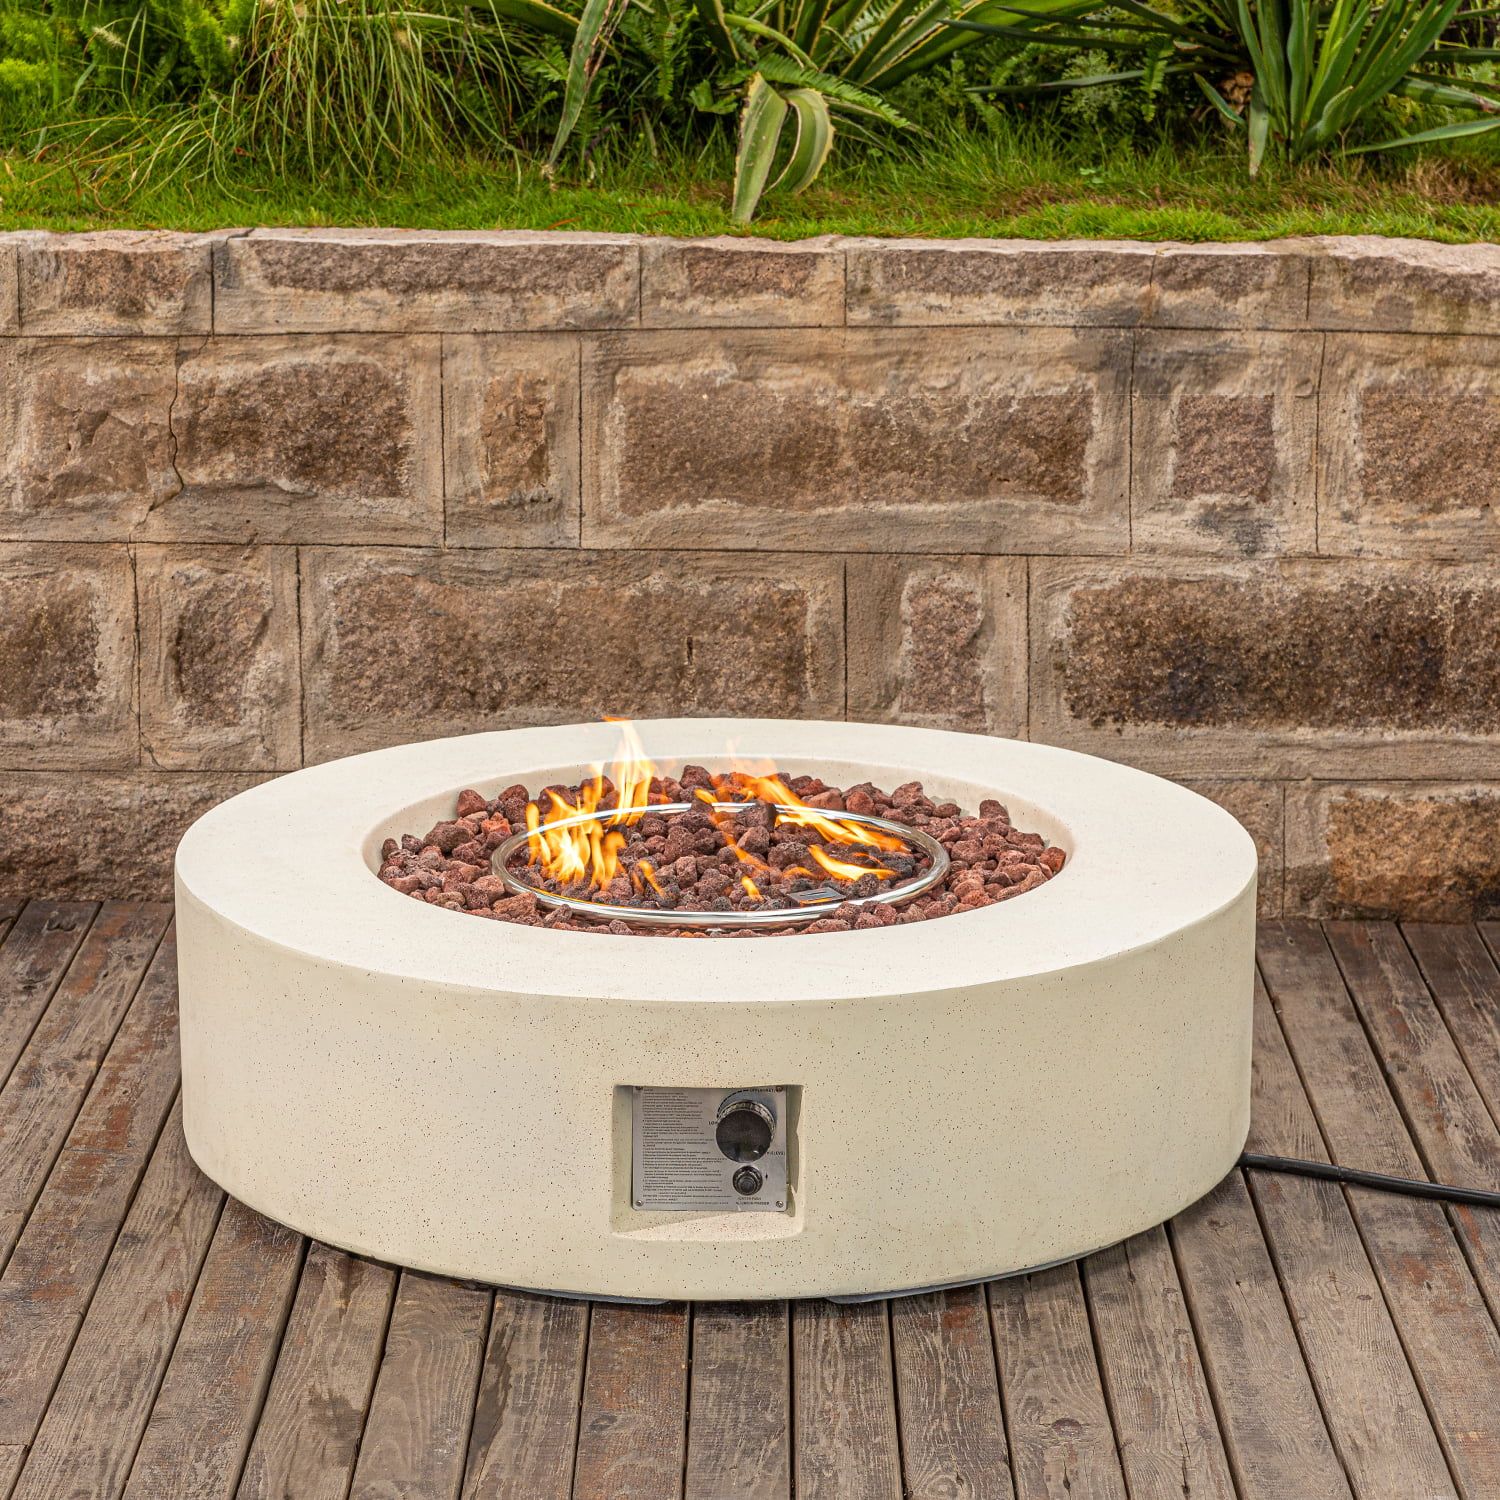 COSIEST Outdoor Propane Fire Pit Coffee Table with Round Base Patio Heater | Walmart (US)